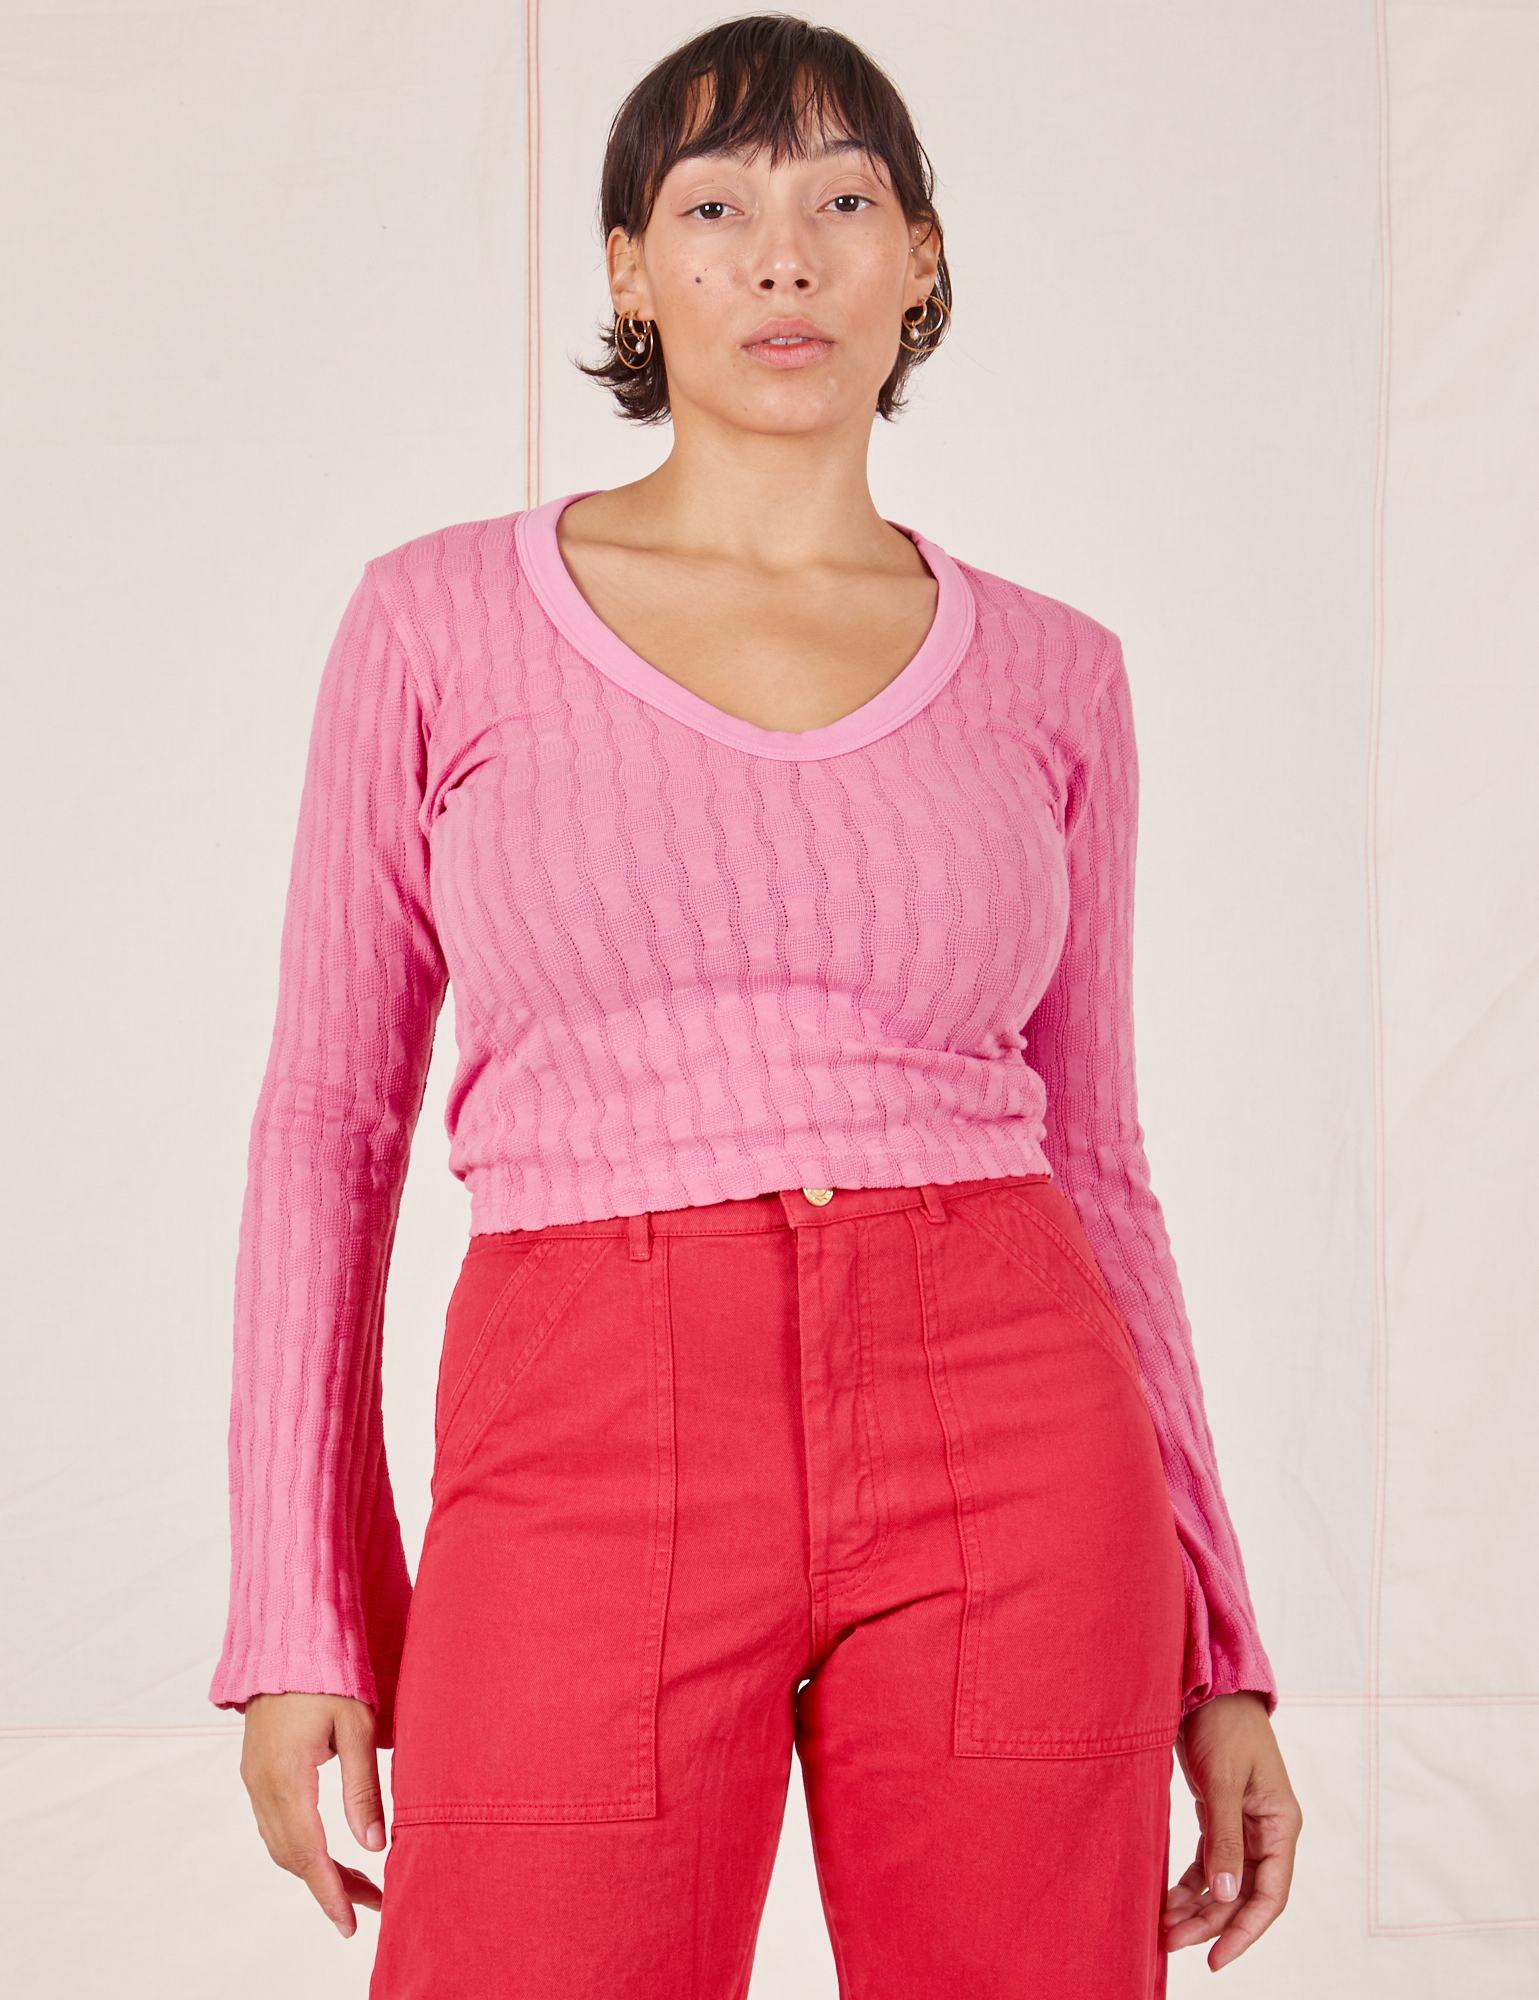 Tiara is wearing S Bell Sleeve Top in Bubblegum Pink paired with hot pink Work Pants